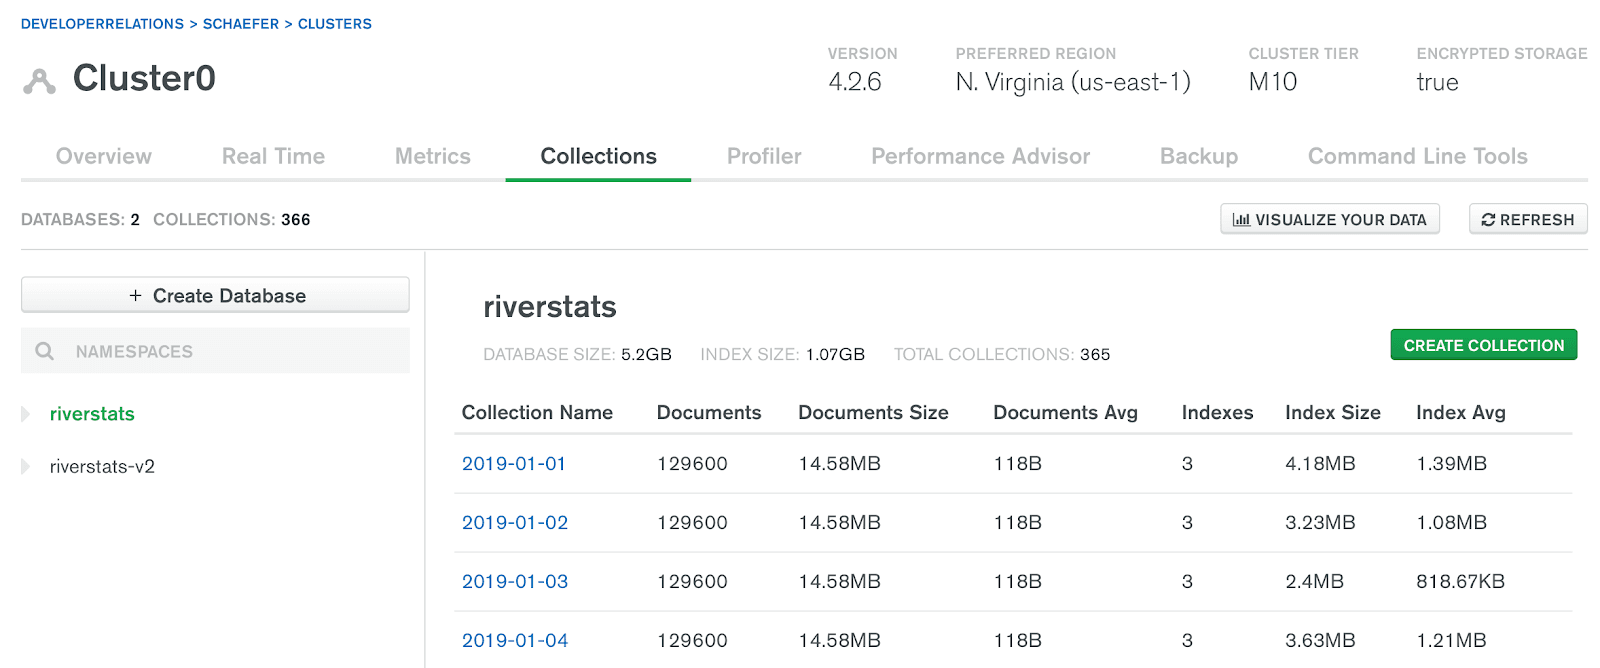 The Atlas Data Explorer displays the database size, index size, and total number of collections for the riverstats database.